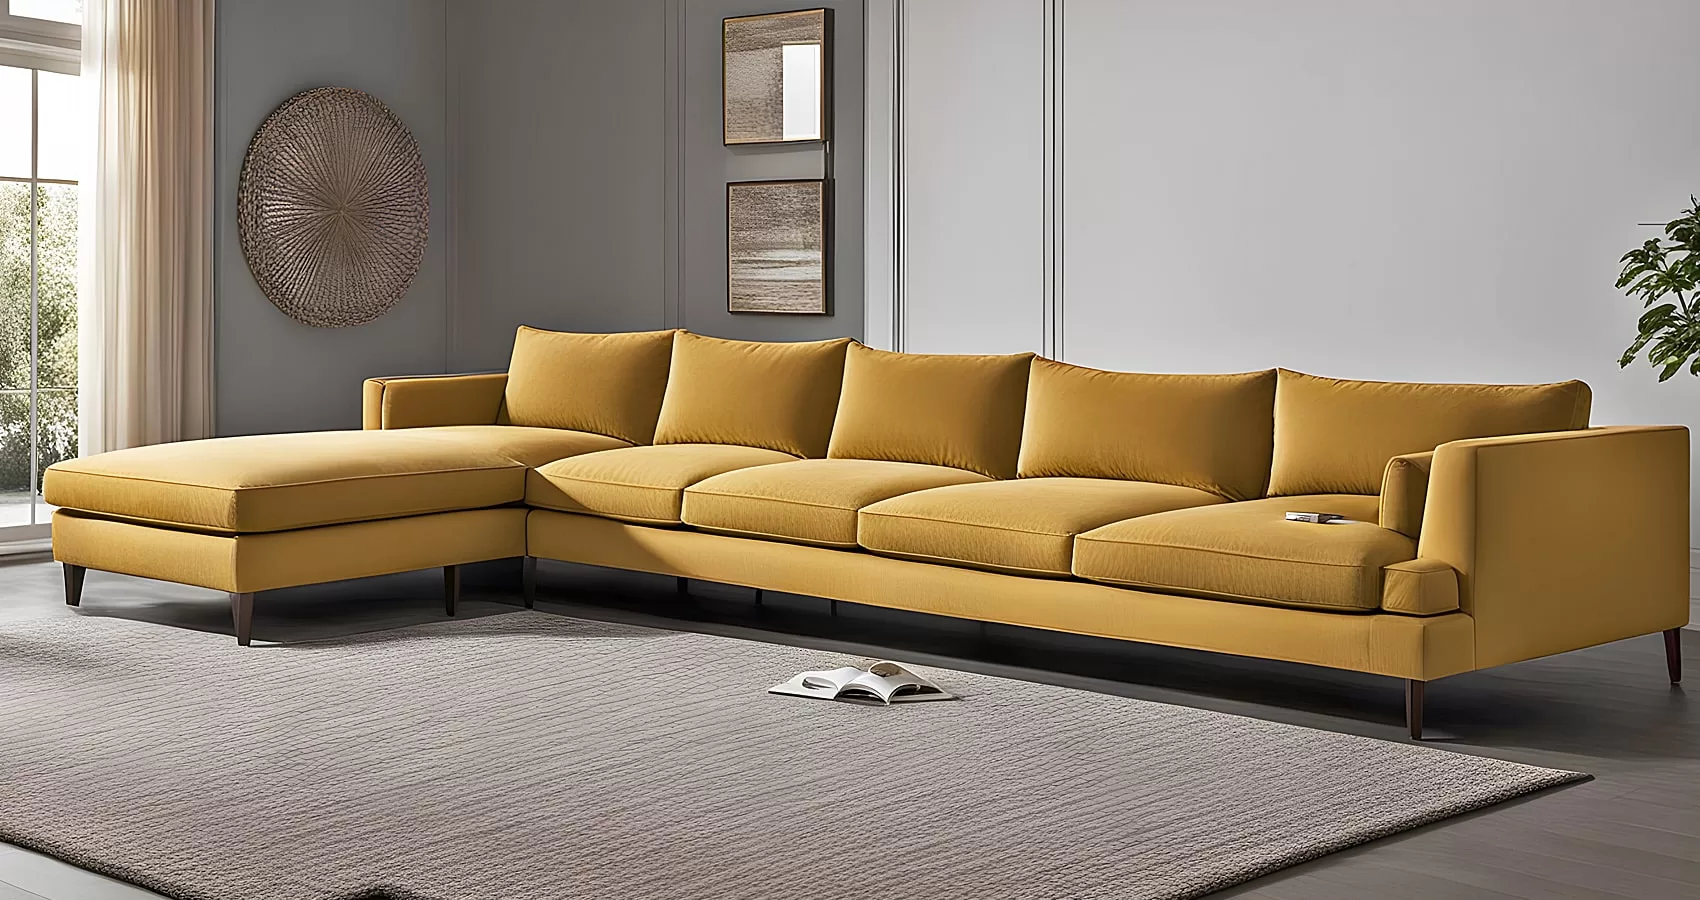 Sofa with Chaise Lounge